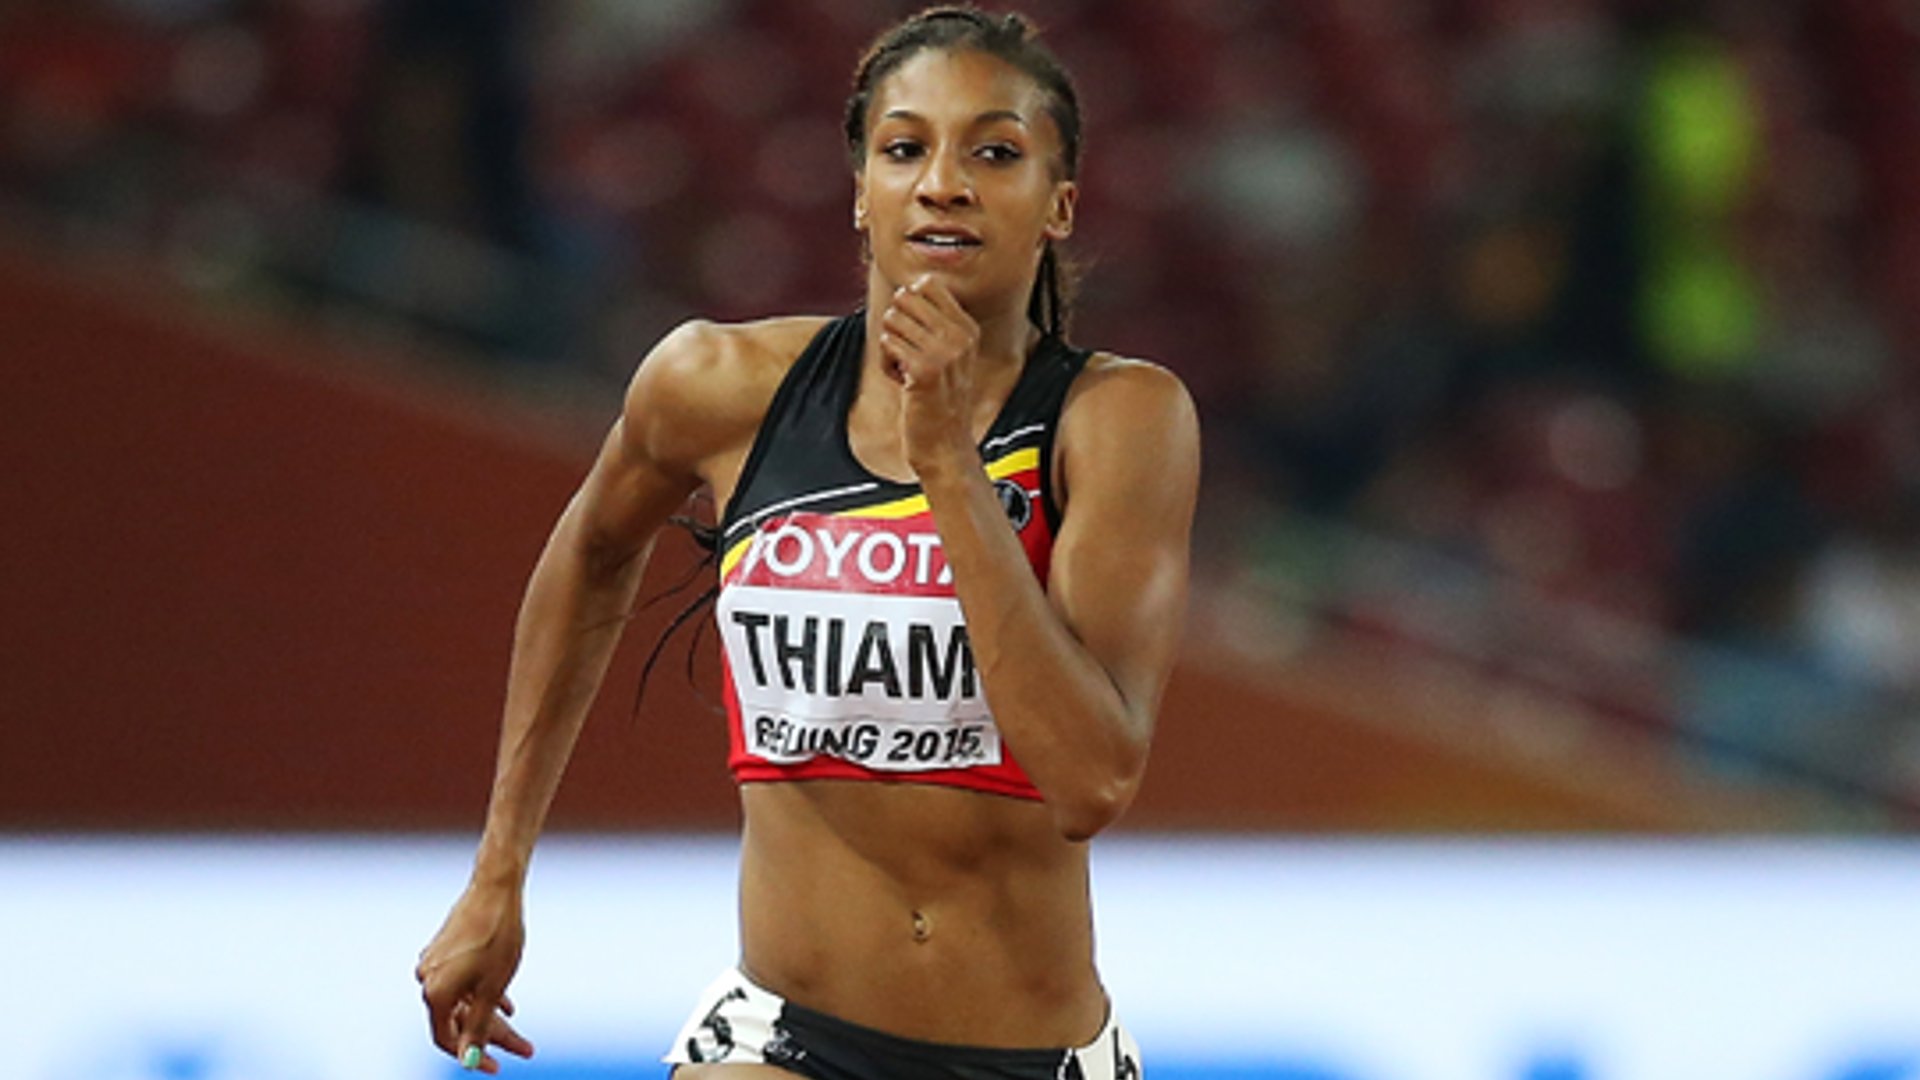 Nafissatou Thiam in action during the sprint event at Beijing 2015 (Image Credits - World Athletics)